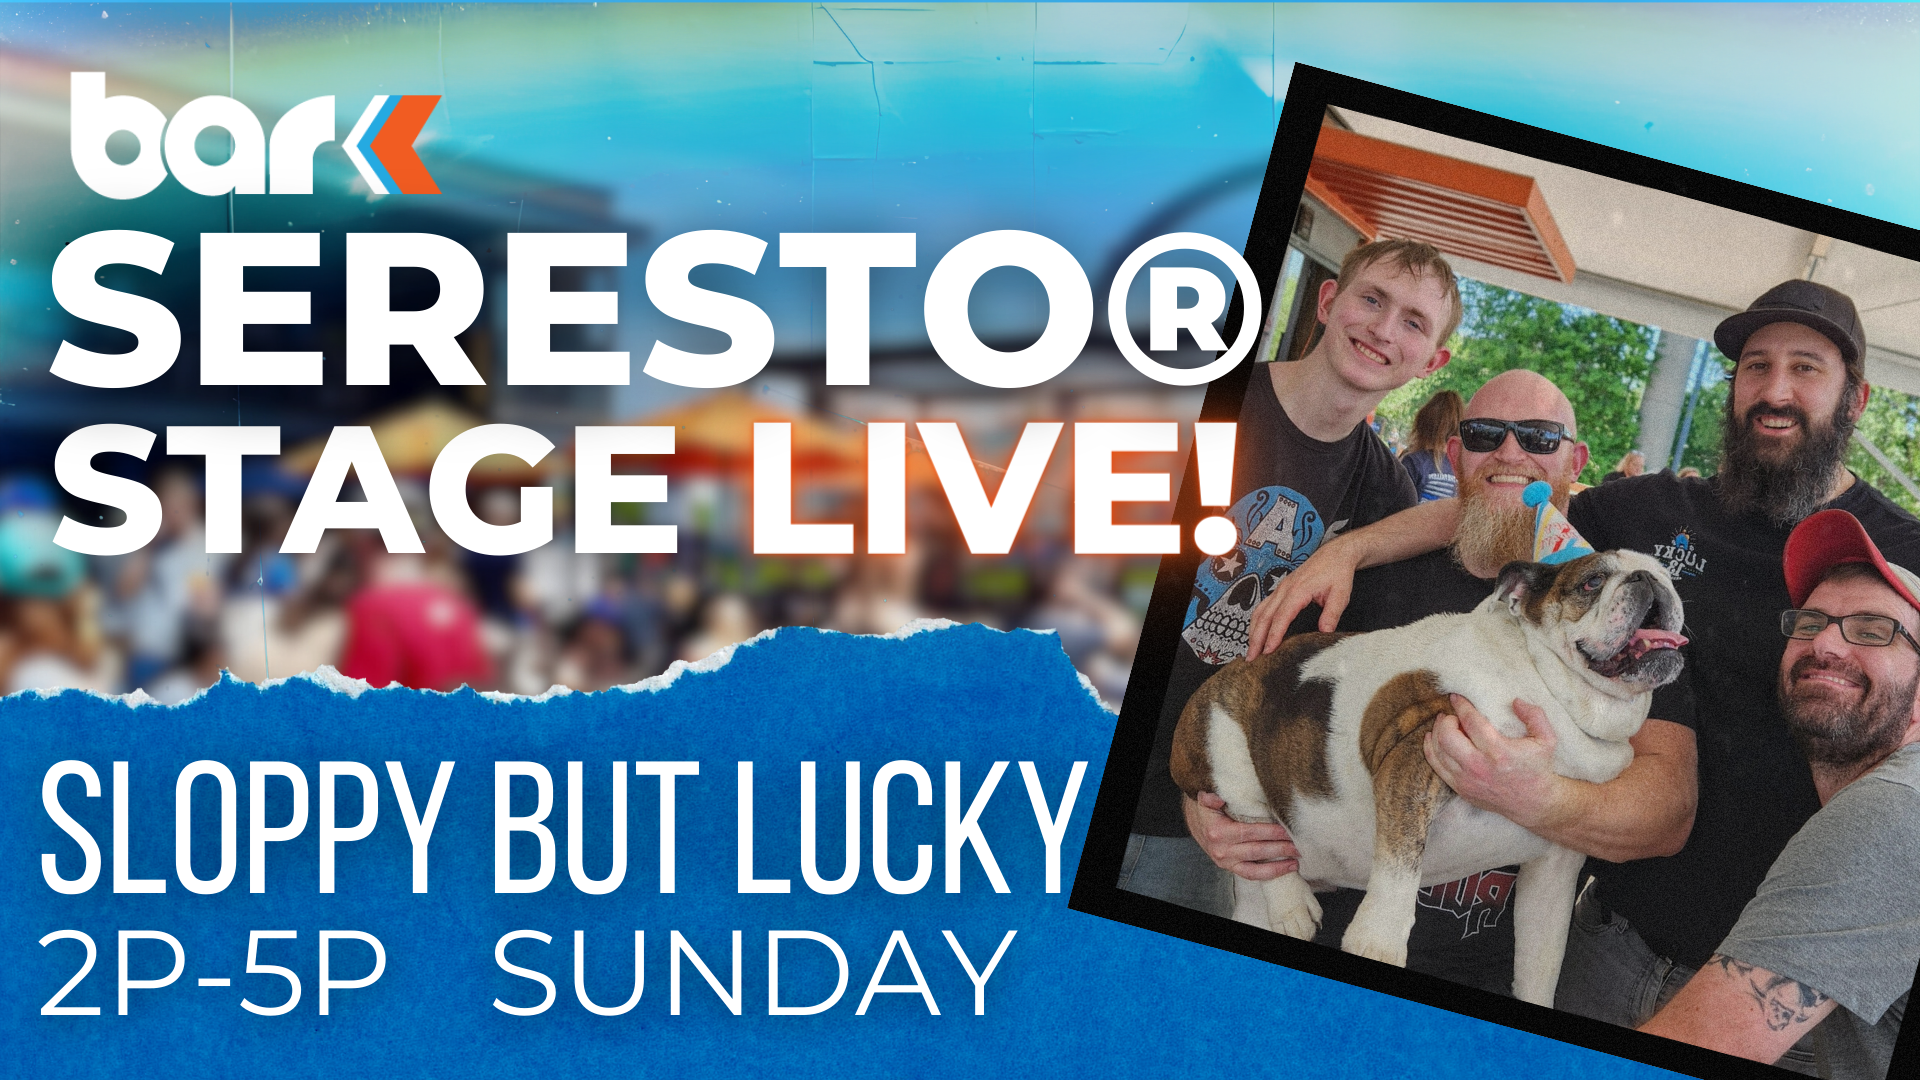 Four men holding a dog in a birthday hat Text - Bar K Seresto Stage Live! Sloppy but lucky 2pm to 5pm Sunday